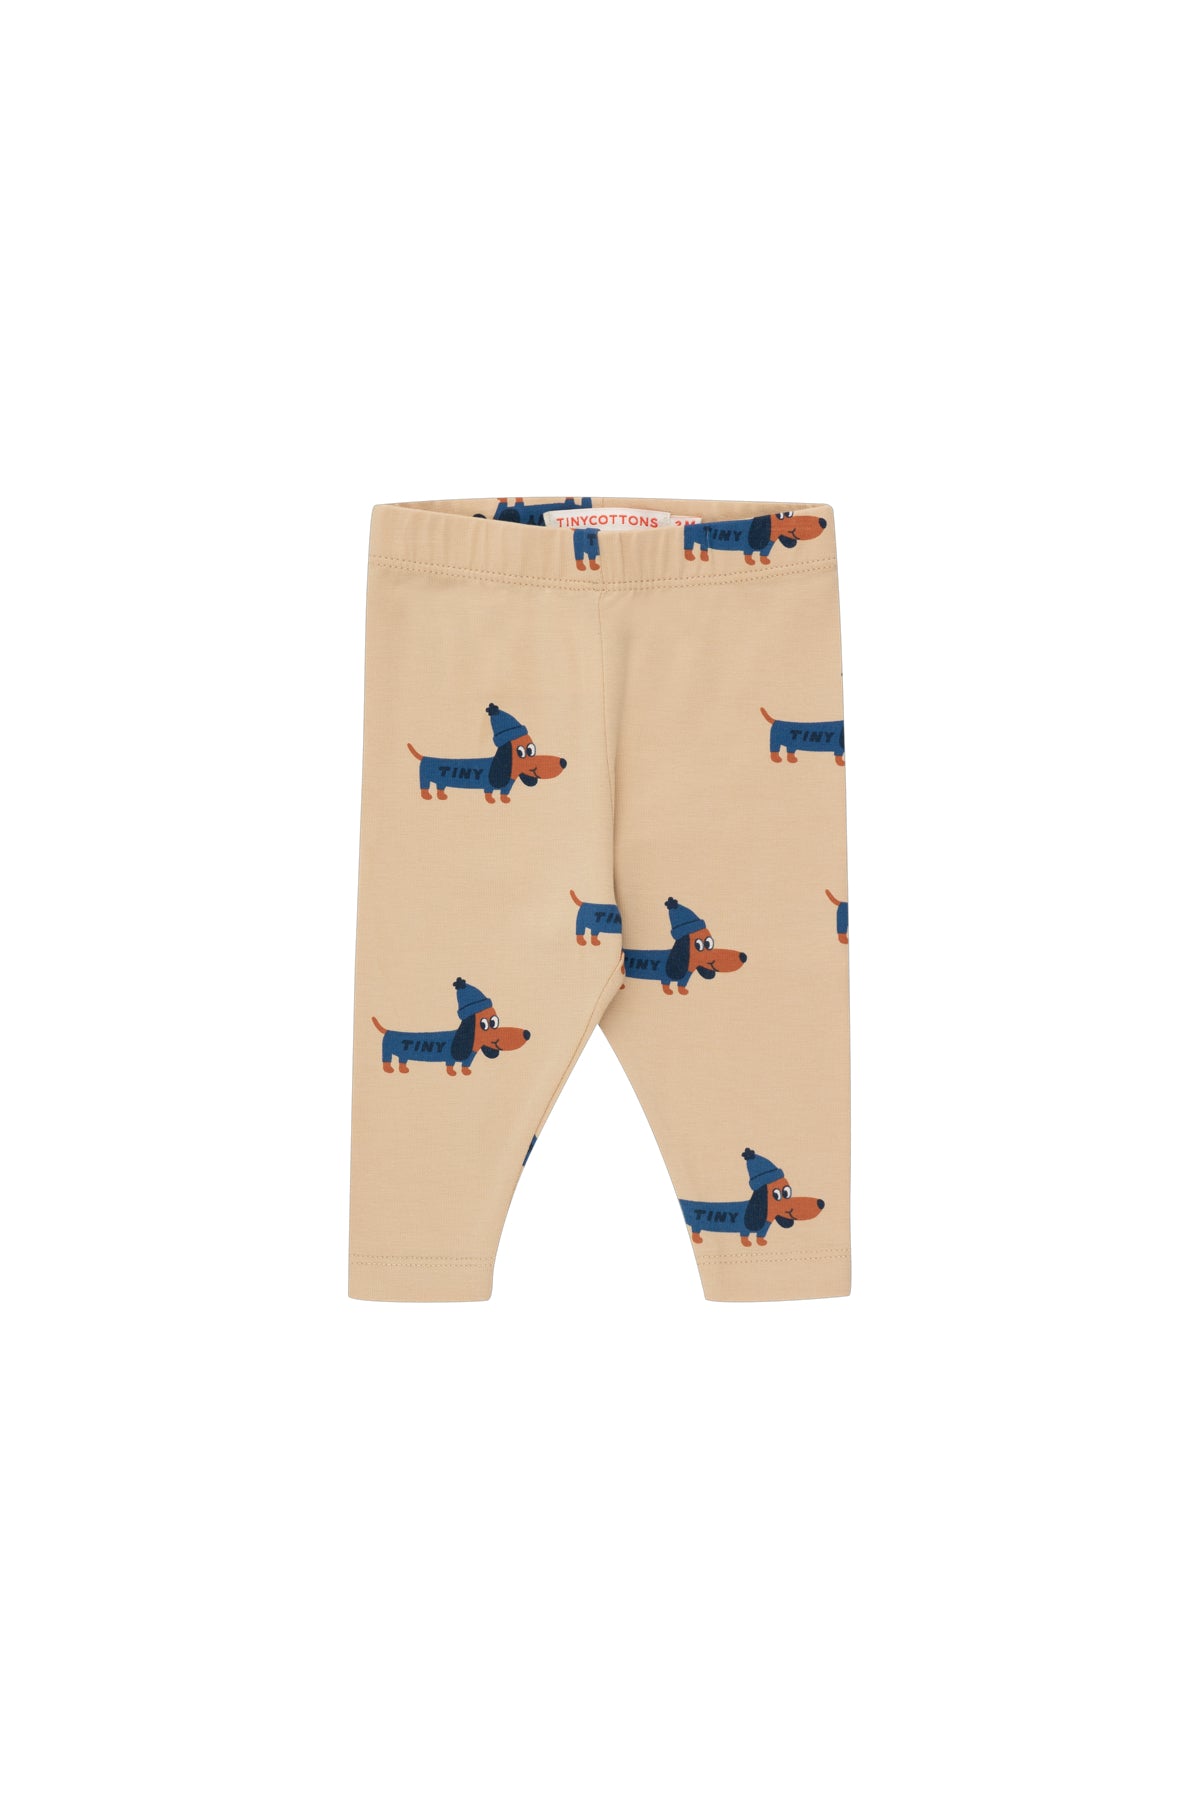 dogs pant